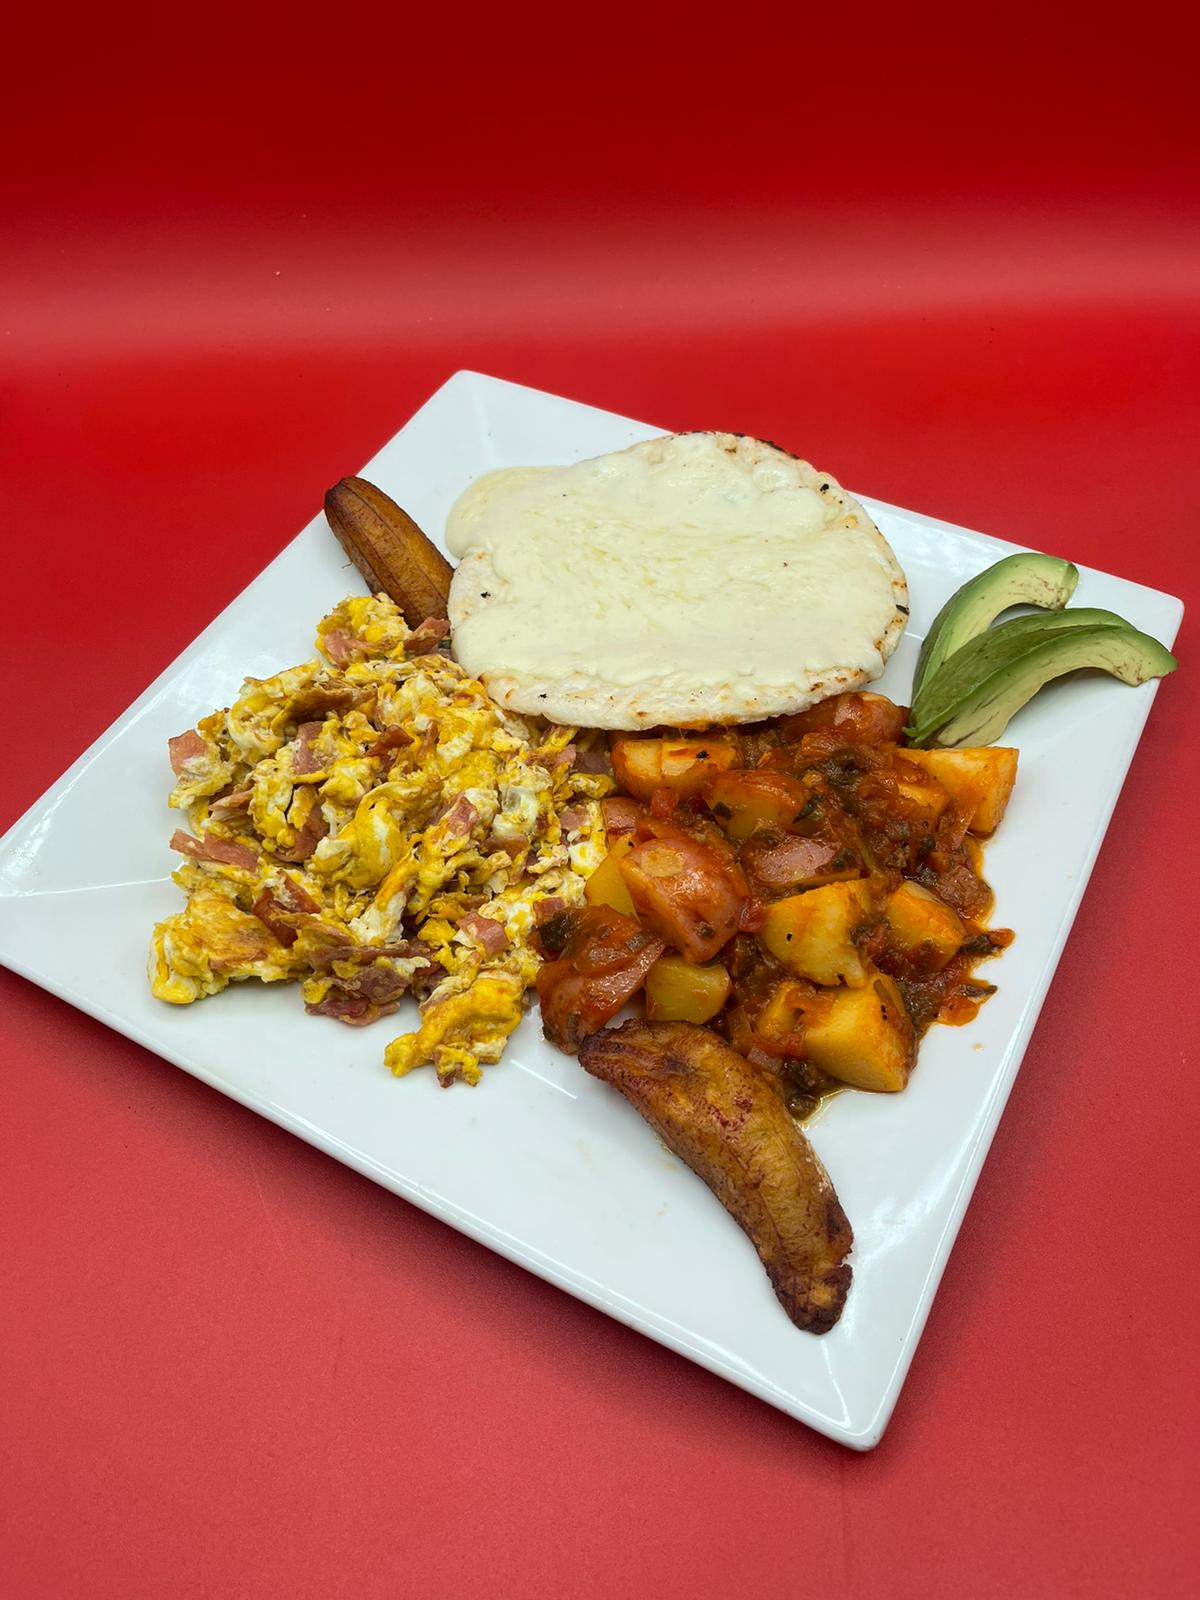 A plate of food with eggs, potatoes and tortillas on a red background.